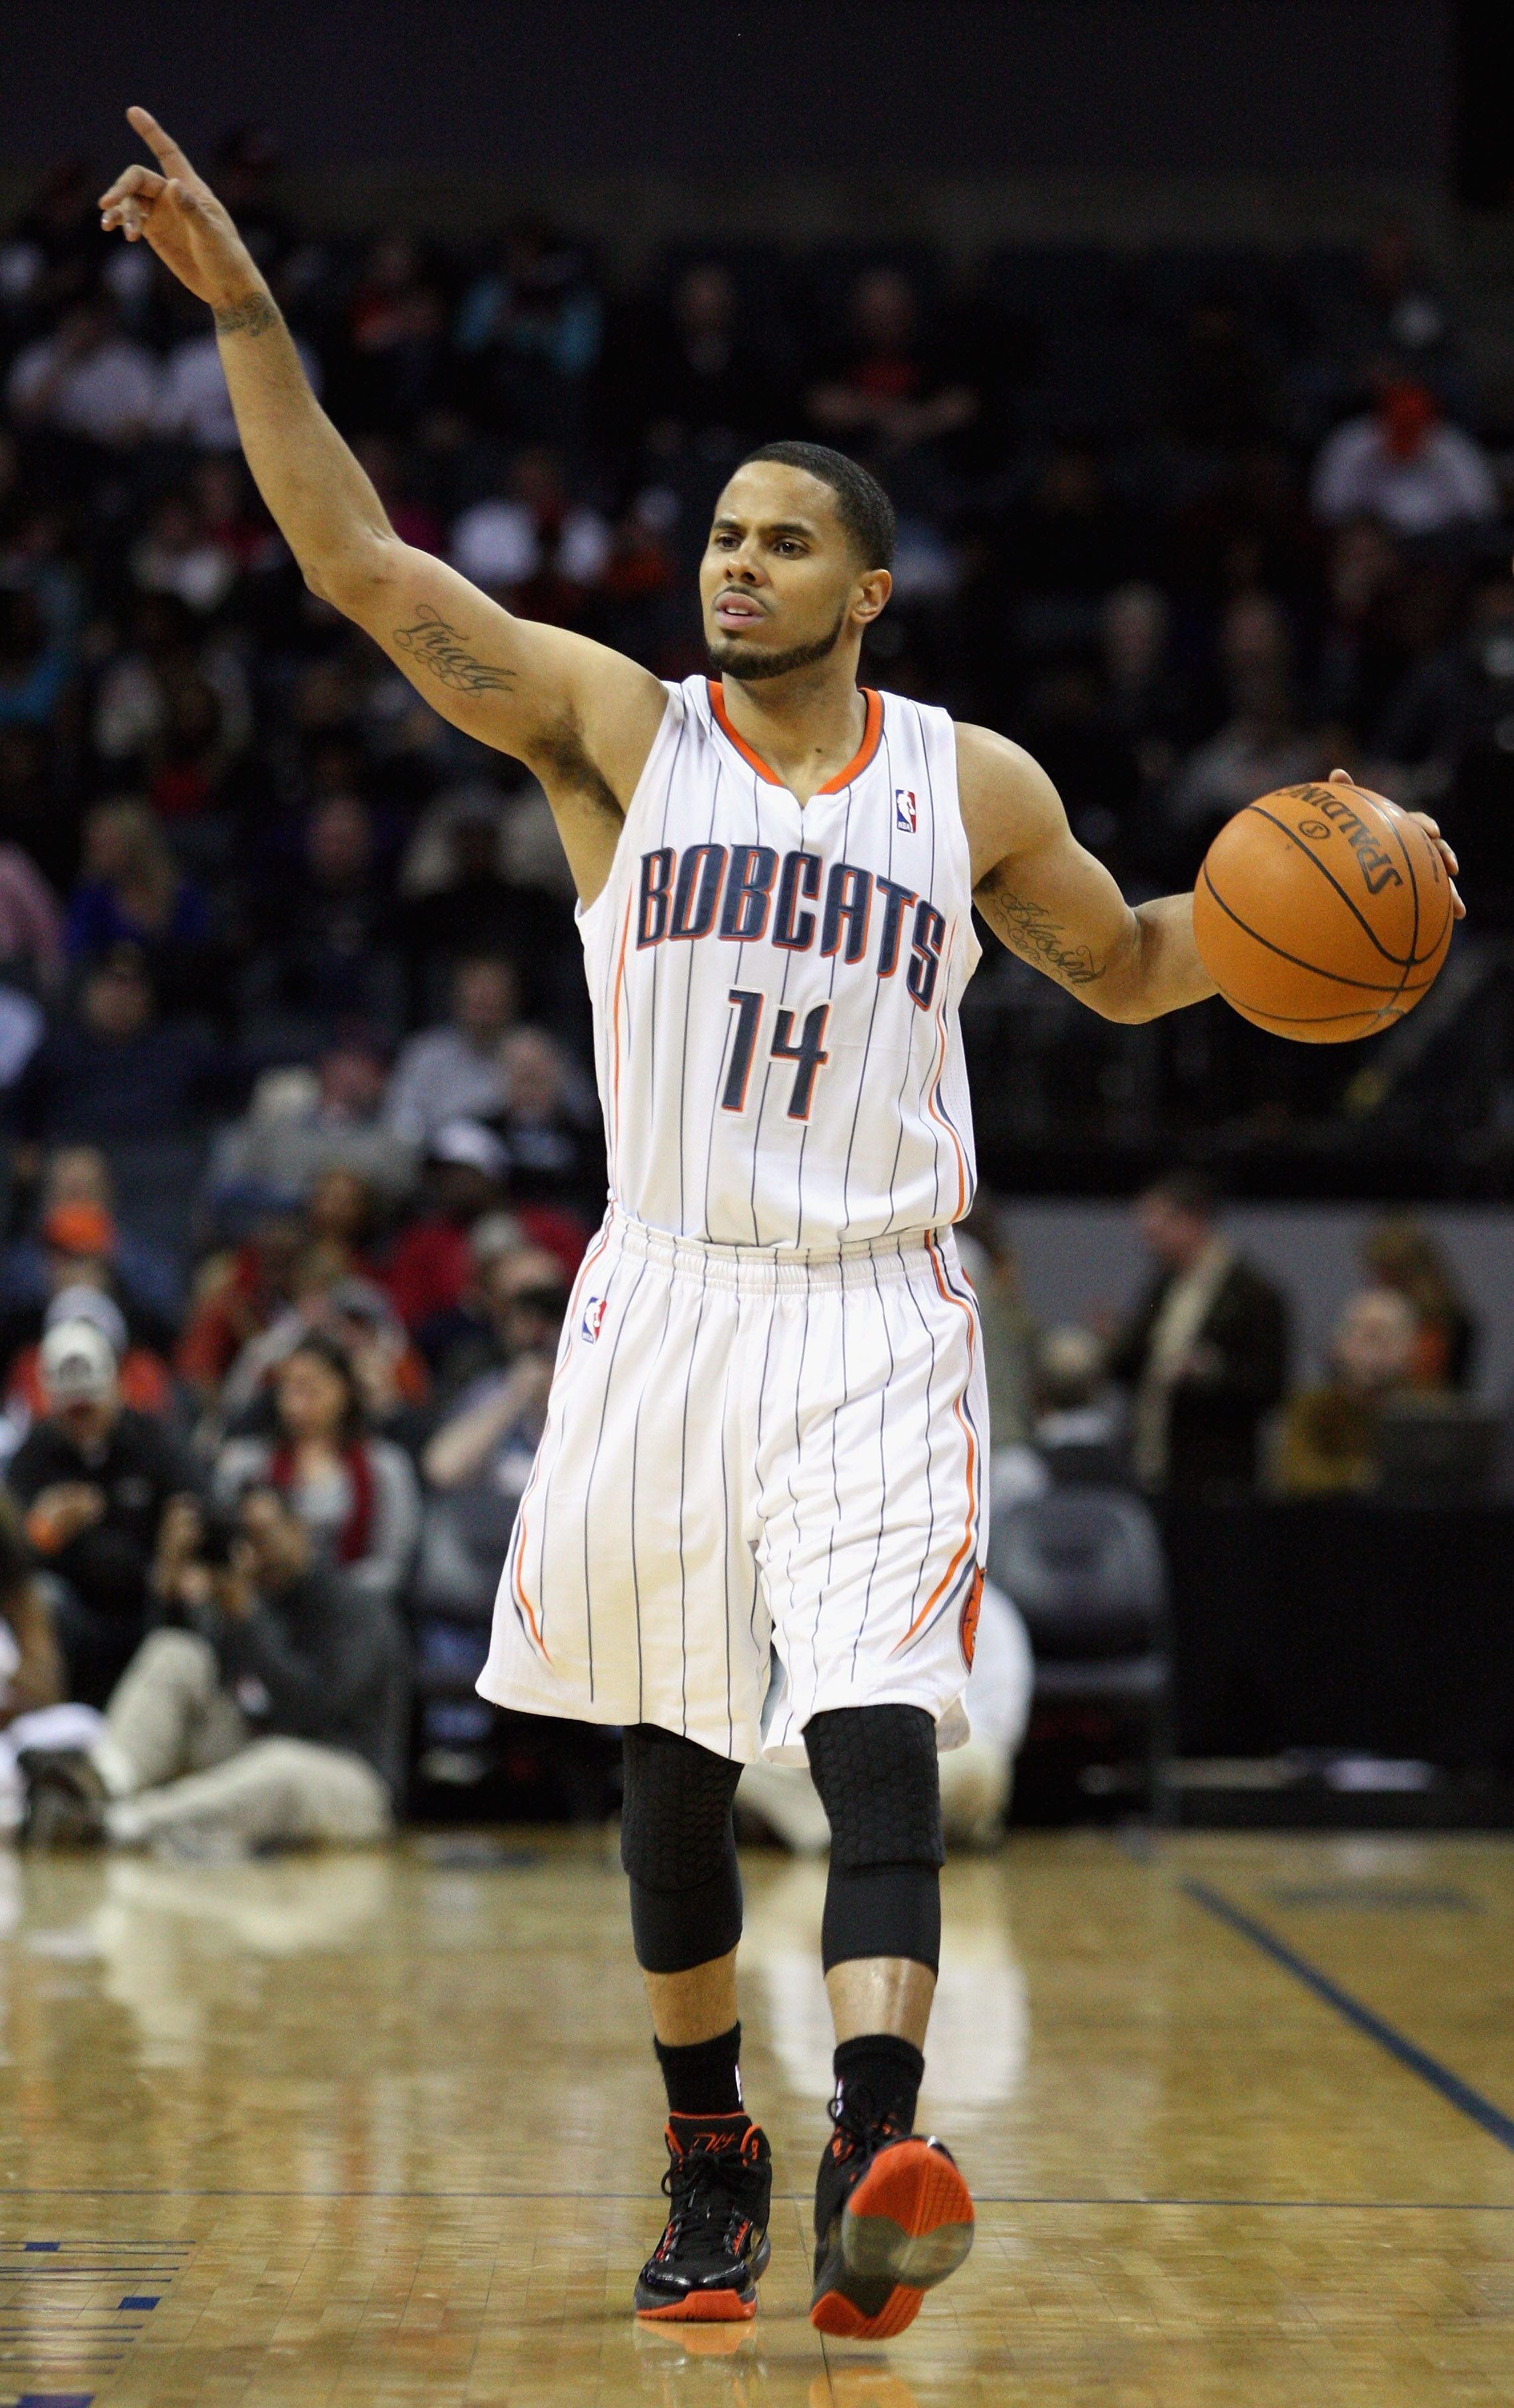 CHARLOTTE, NC - JANUARY 12:  D.J. Augustin #14 of the Charlotte Bobcats calls a play against the Chicago Bulls during their game at Time Warner Cable Arena on January 12, 2011 in Charlotte, North Carolina. NOTE TO USER: User expressly acknowledges and agr